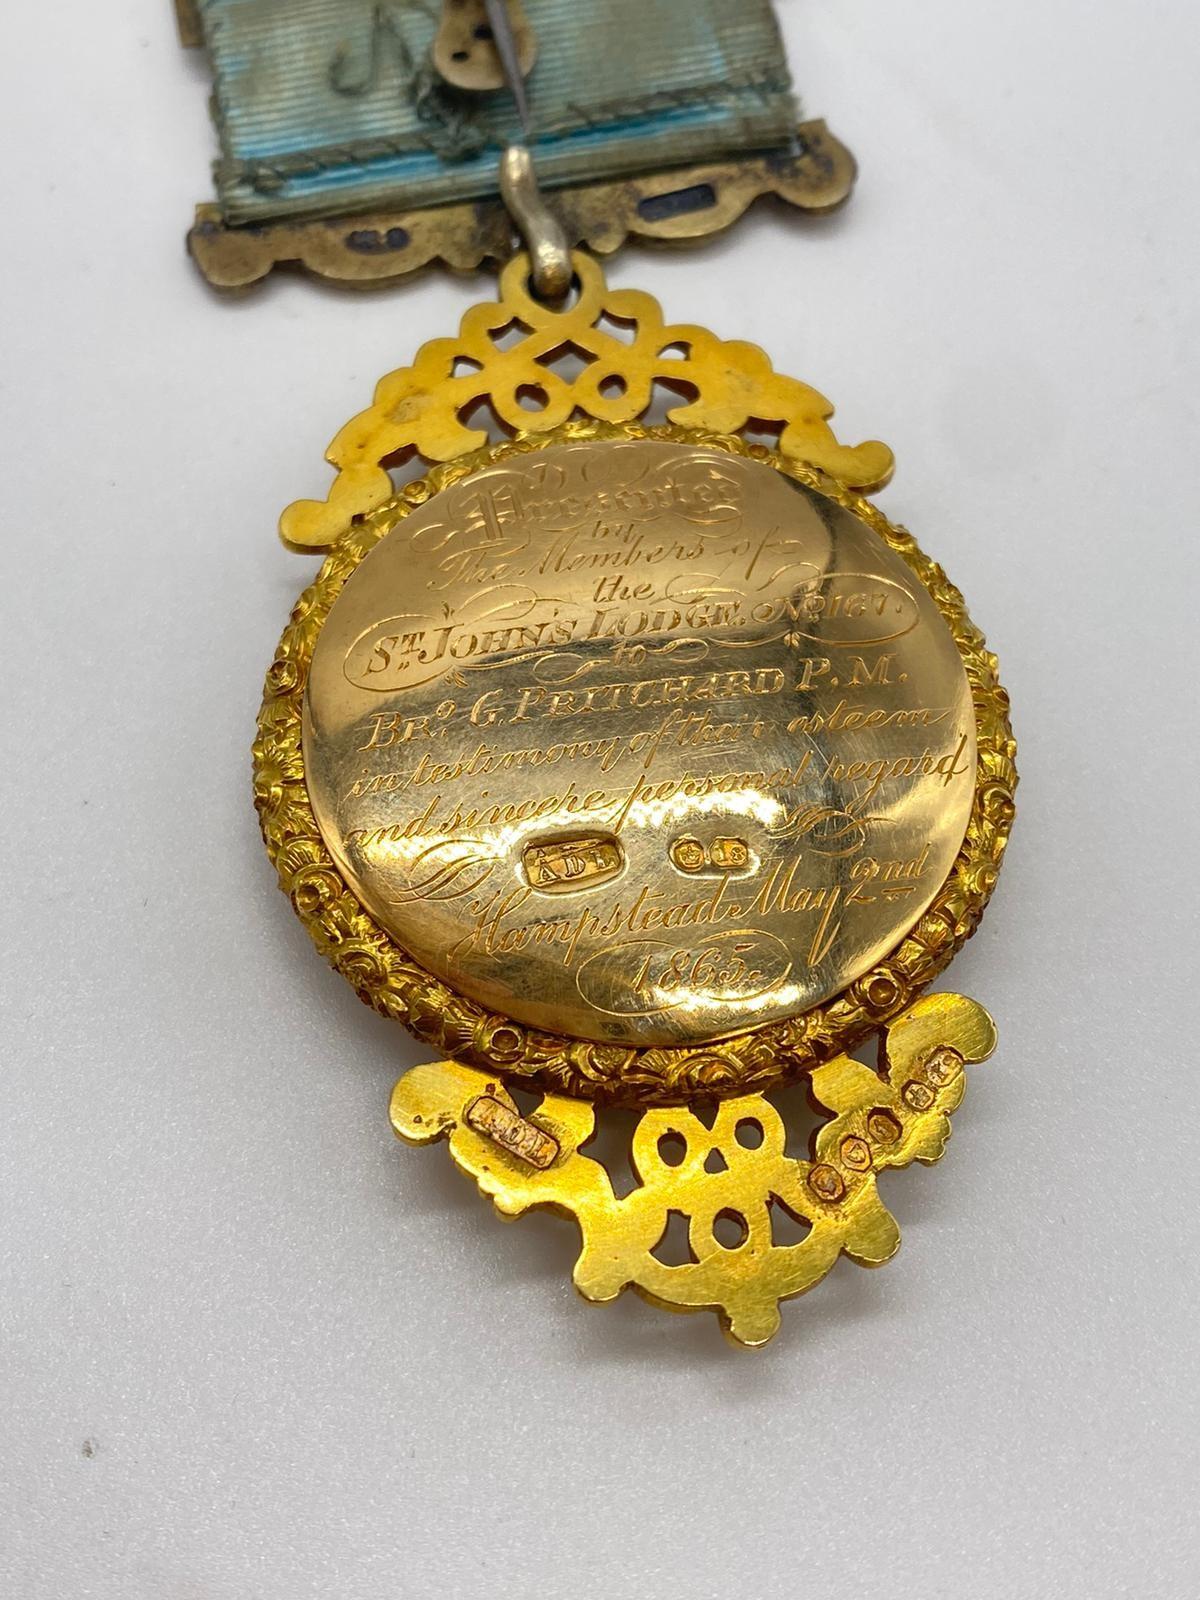 18ct gold Masonic jewel dated 1865 from the St's John lodge Hampstead number 167, weight 62.3g total - Image 7 of 8